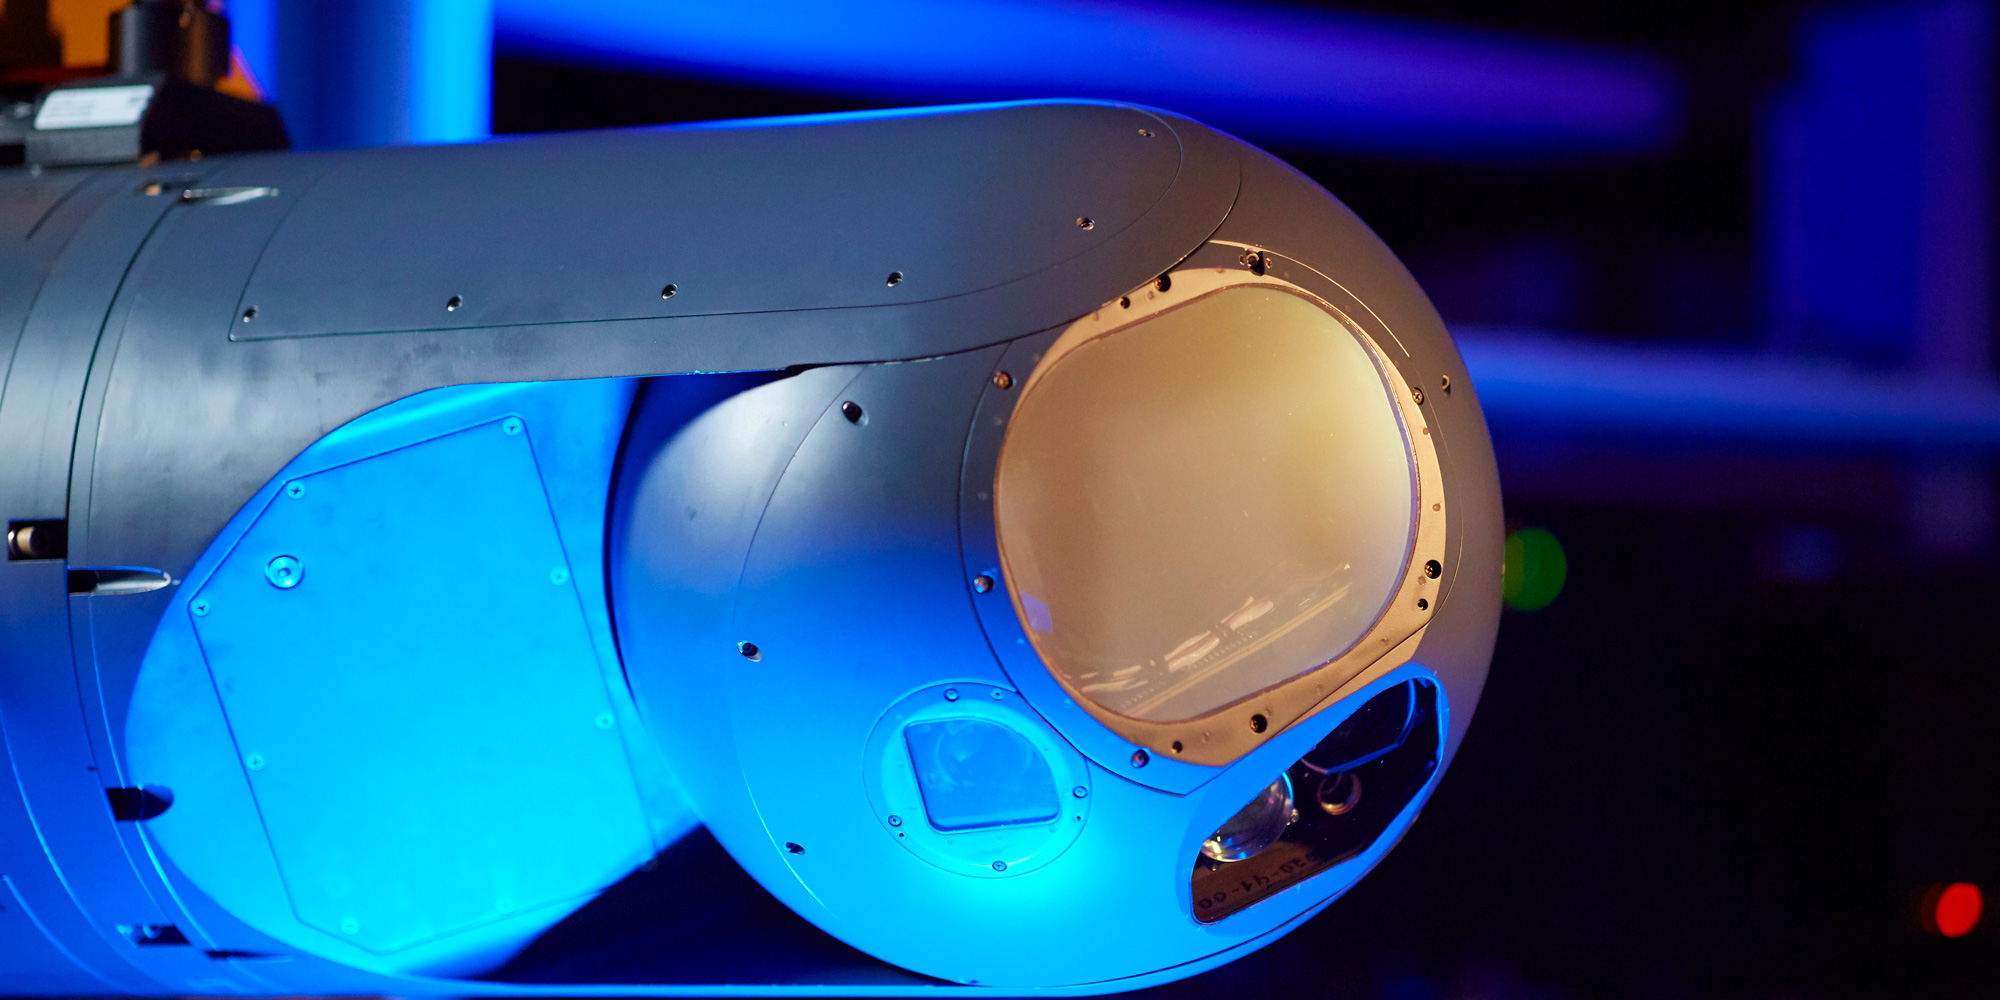 LITENING Large Aperture targeting pod in electro-optical/infrared laboratory